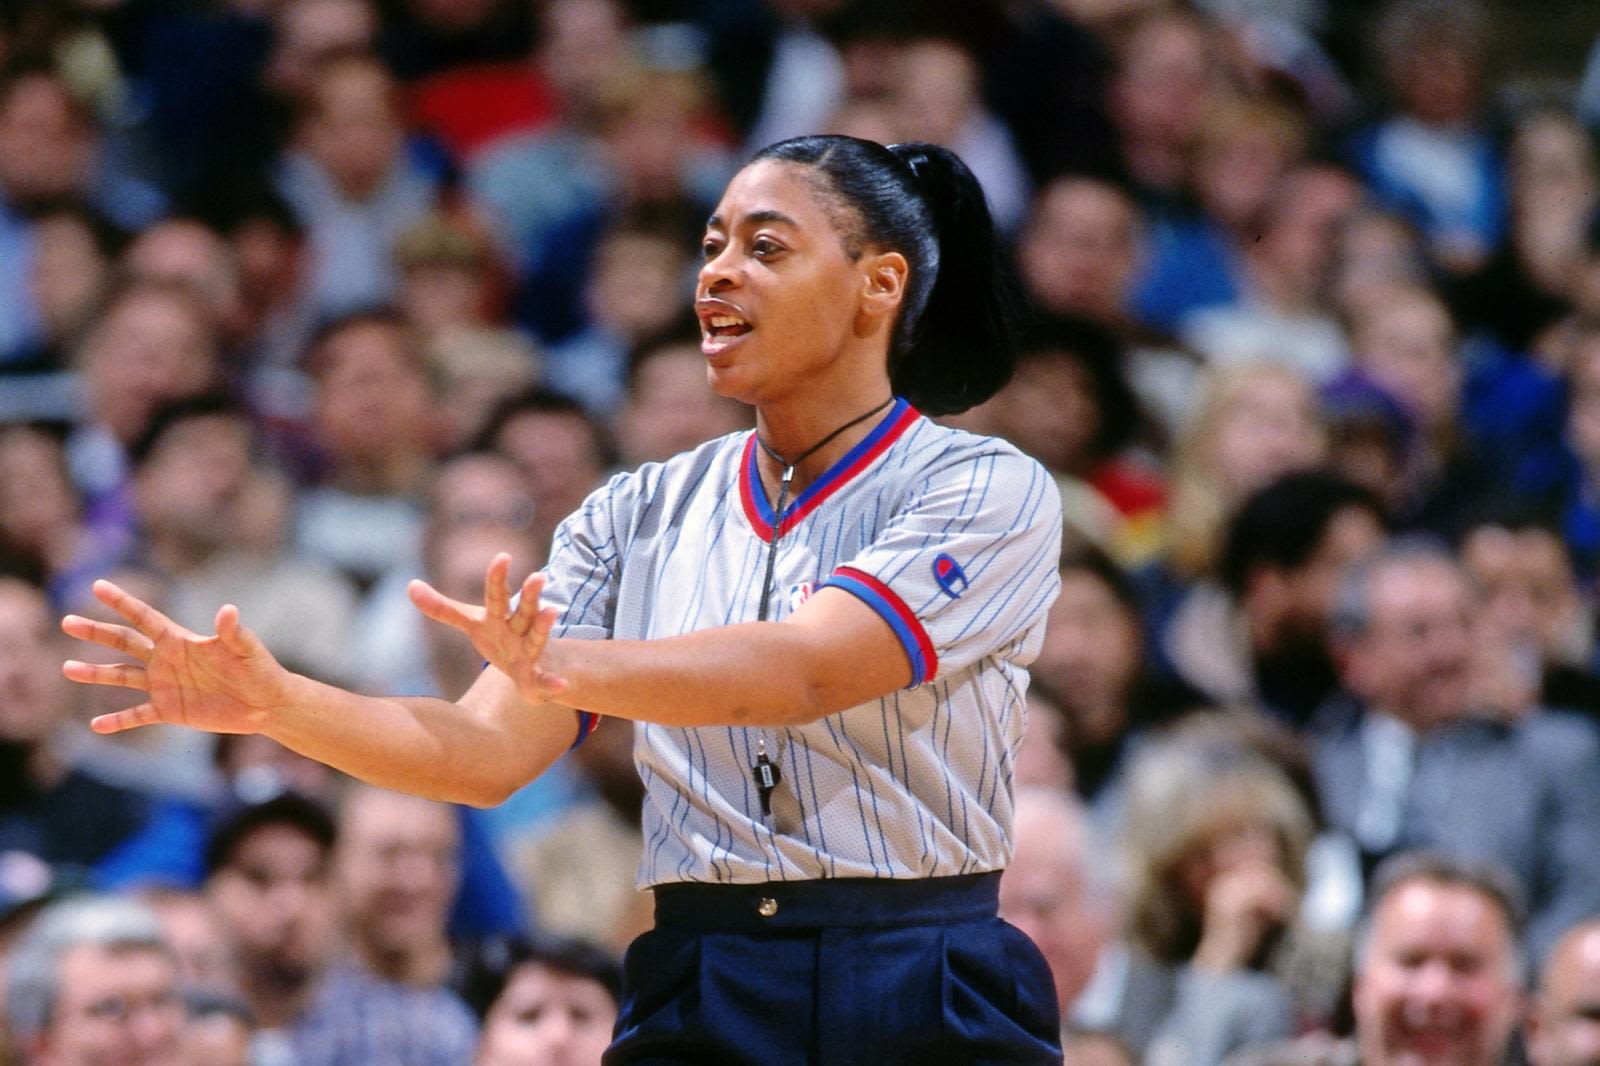 NBA female referees: The league has been around for more than 70 years, and  only now is getting its 6th female referee